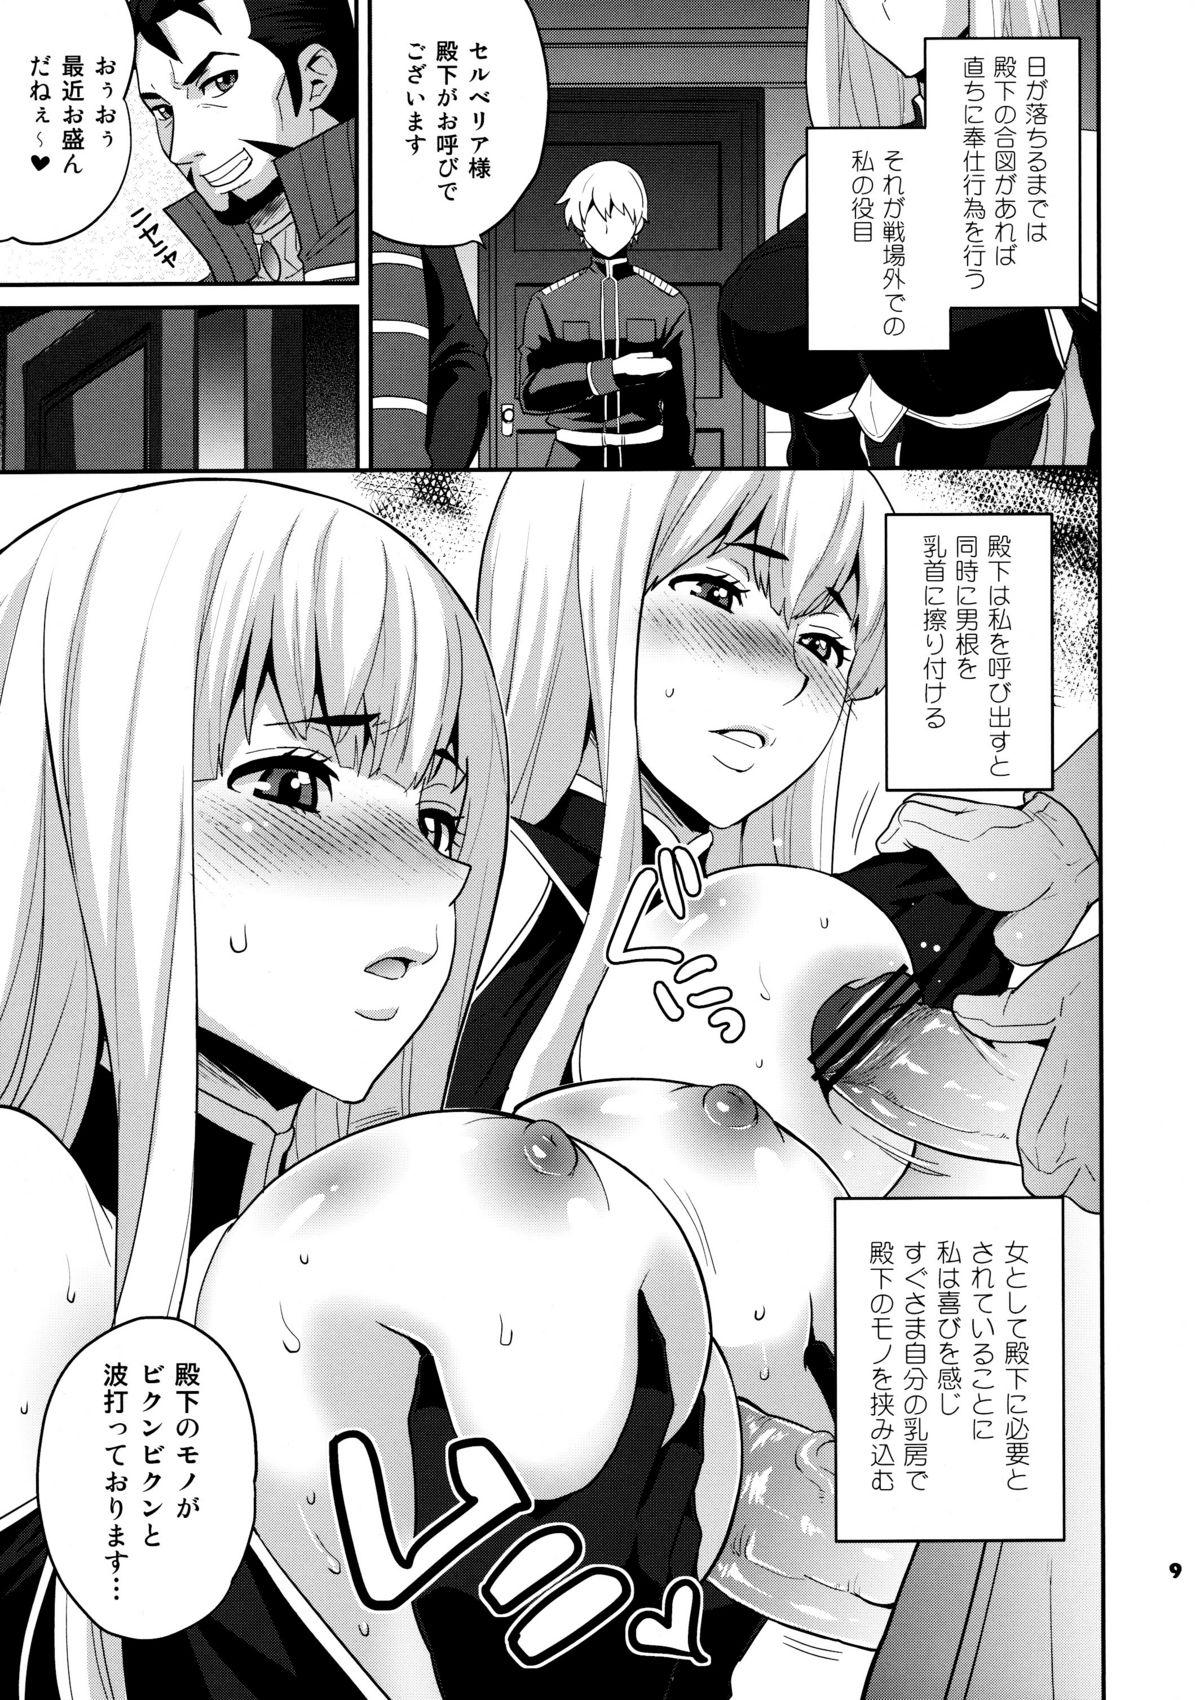 Lesbiansex Blue Reflection - Valkyria chronicles Fucking Girls - Page 9